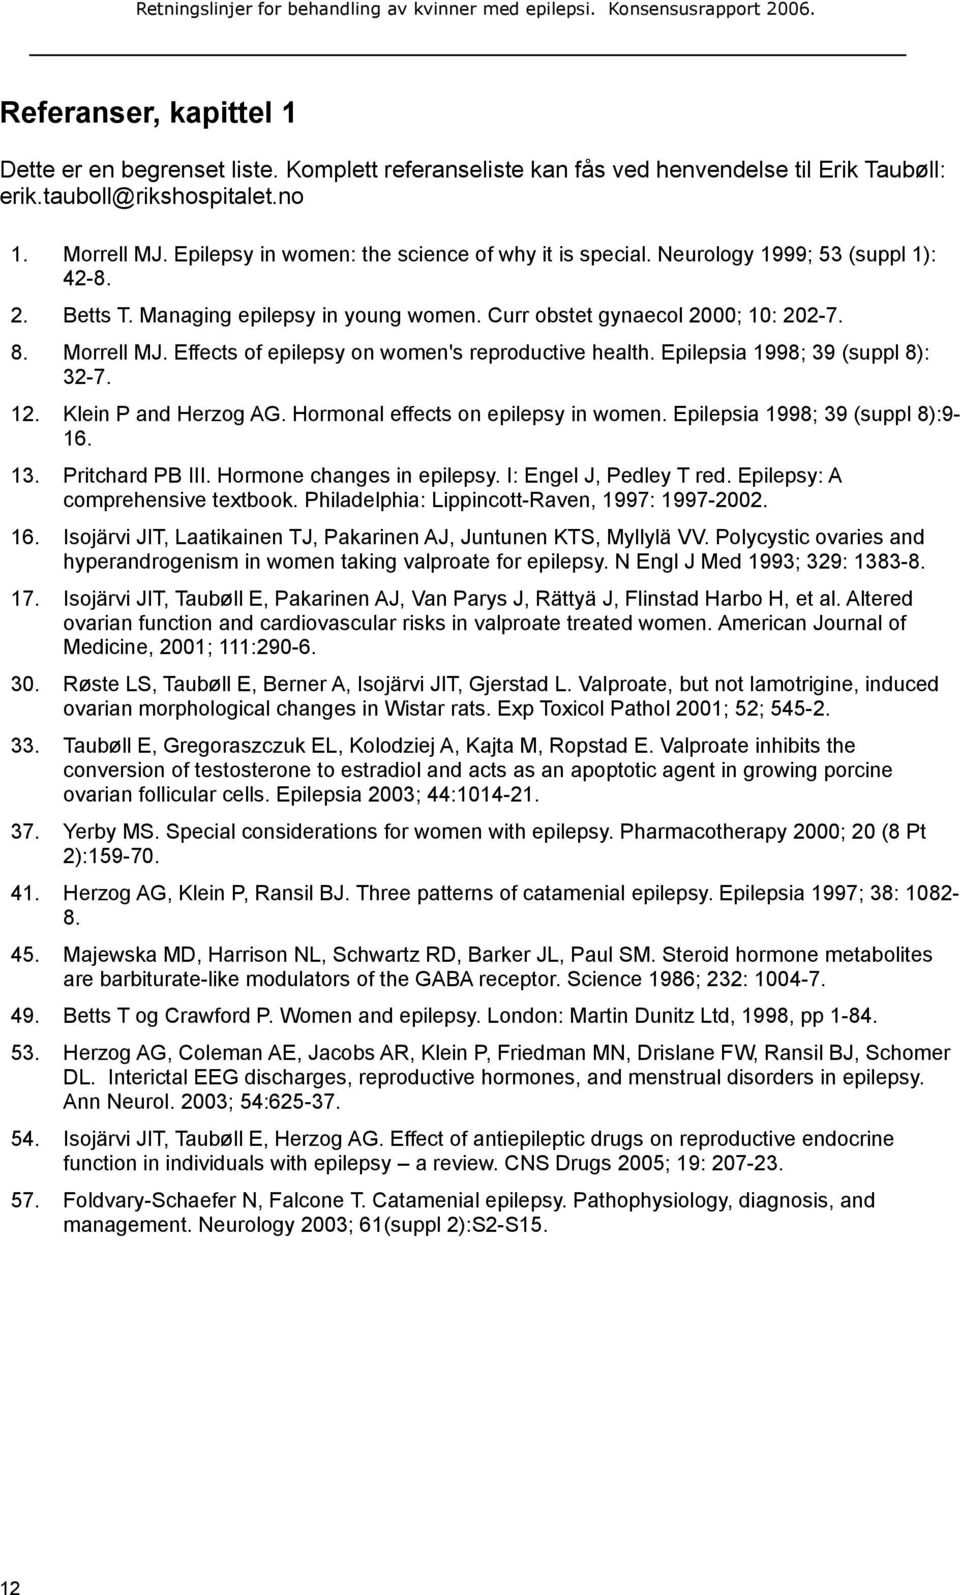 Effects of epilepsy on women's reproductive health. Epilepsia 1998; 39 (suppl 8): 32-7. 12. Klein P and Herzog AG. Hormonal effects on epilepsy in women. Epilepsia 1998; 39 (suppl 8):9-16. 13.